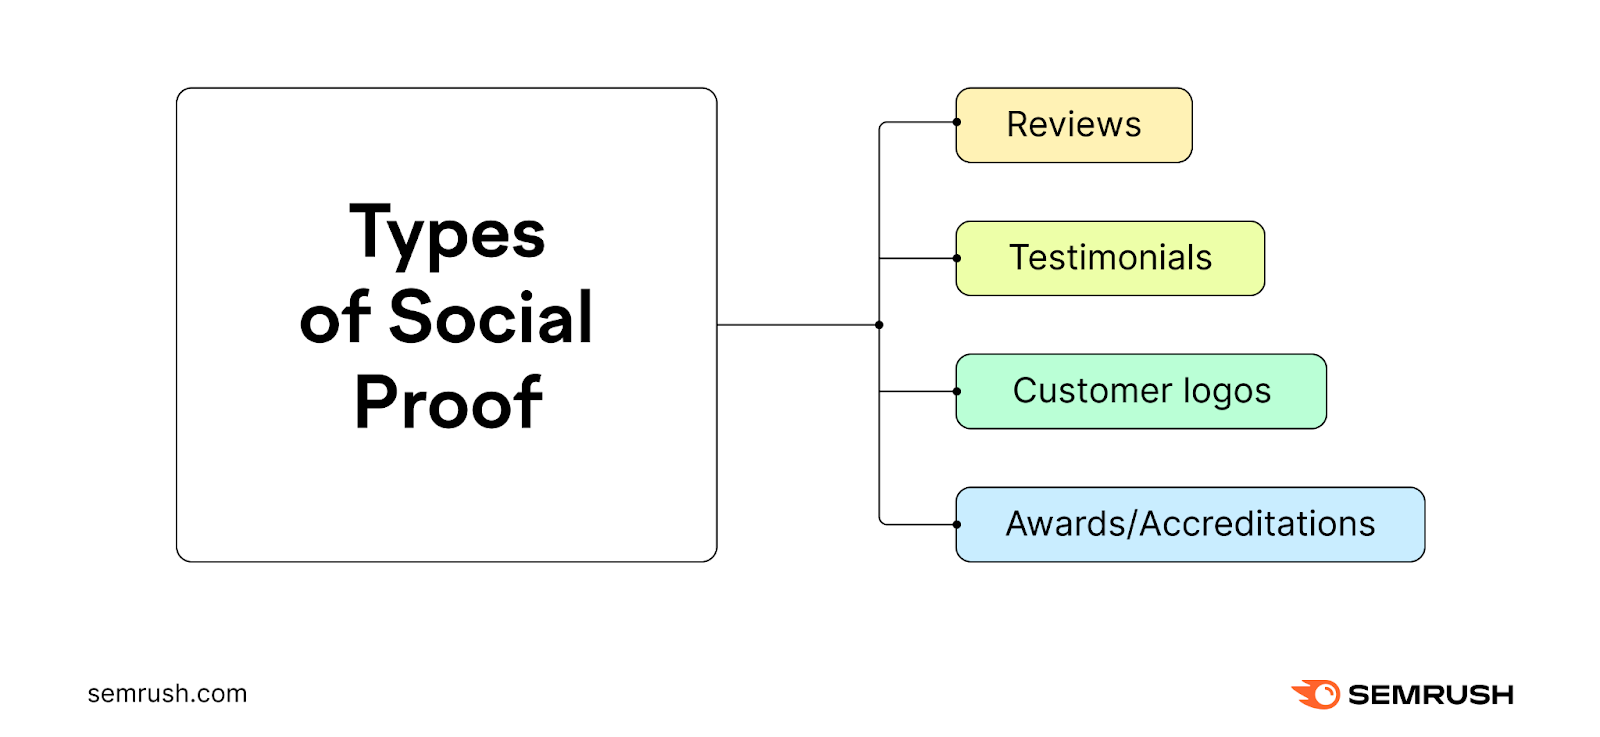 An infographic listing different types of social proof, reviews, testimonials, customer logos, and awards/accreditations